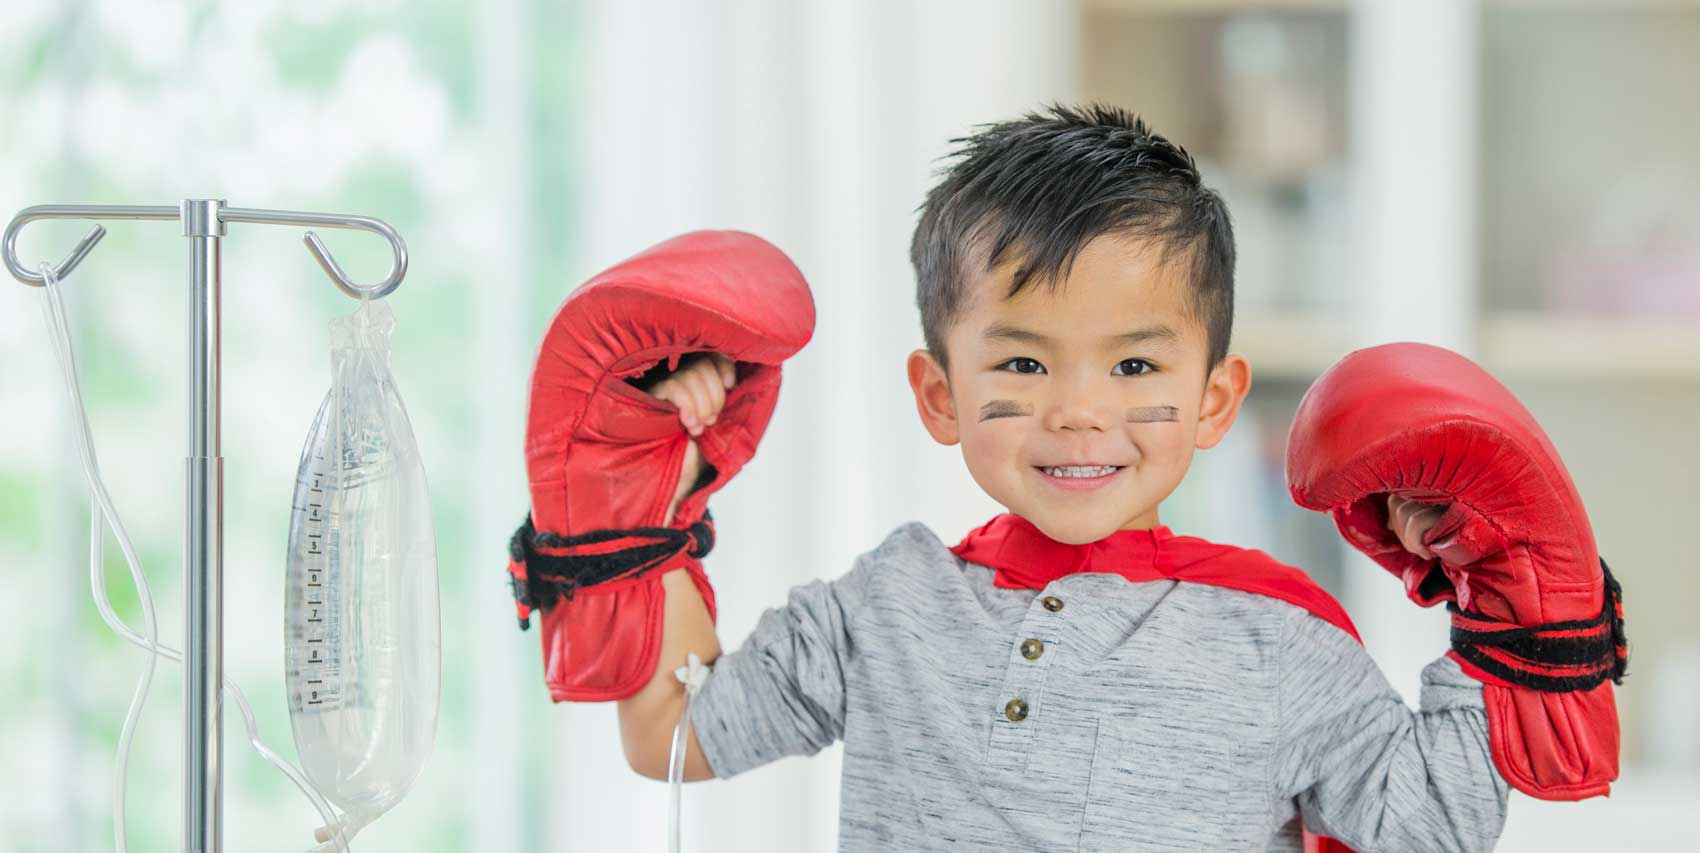 Child with Boxing Gloves on.